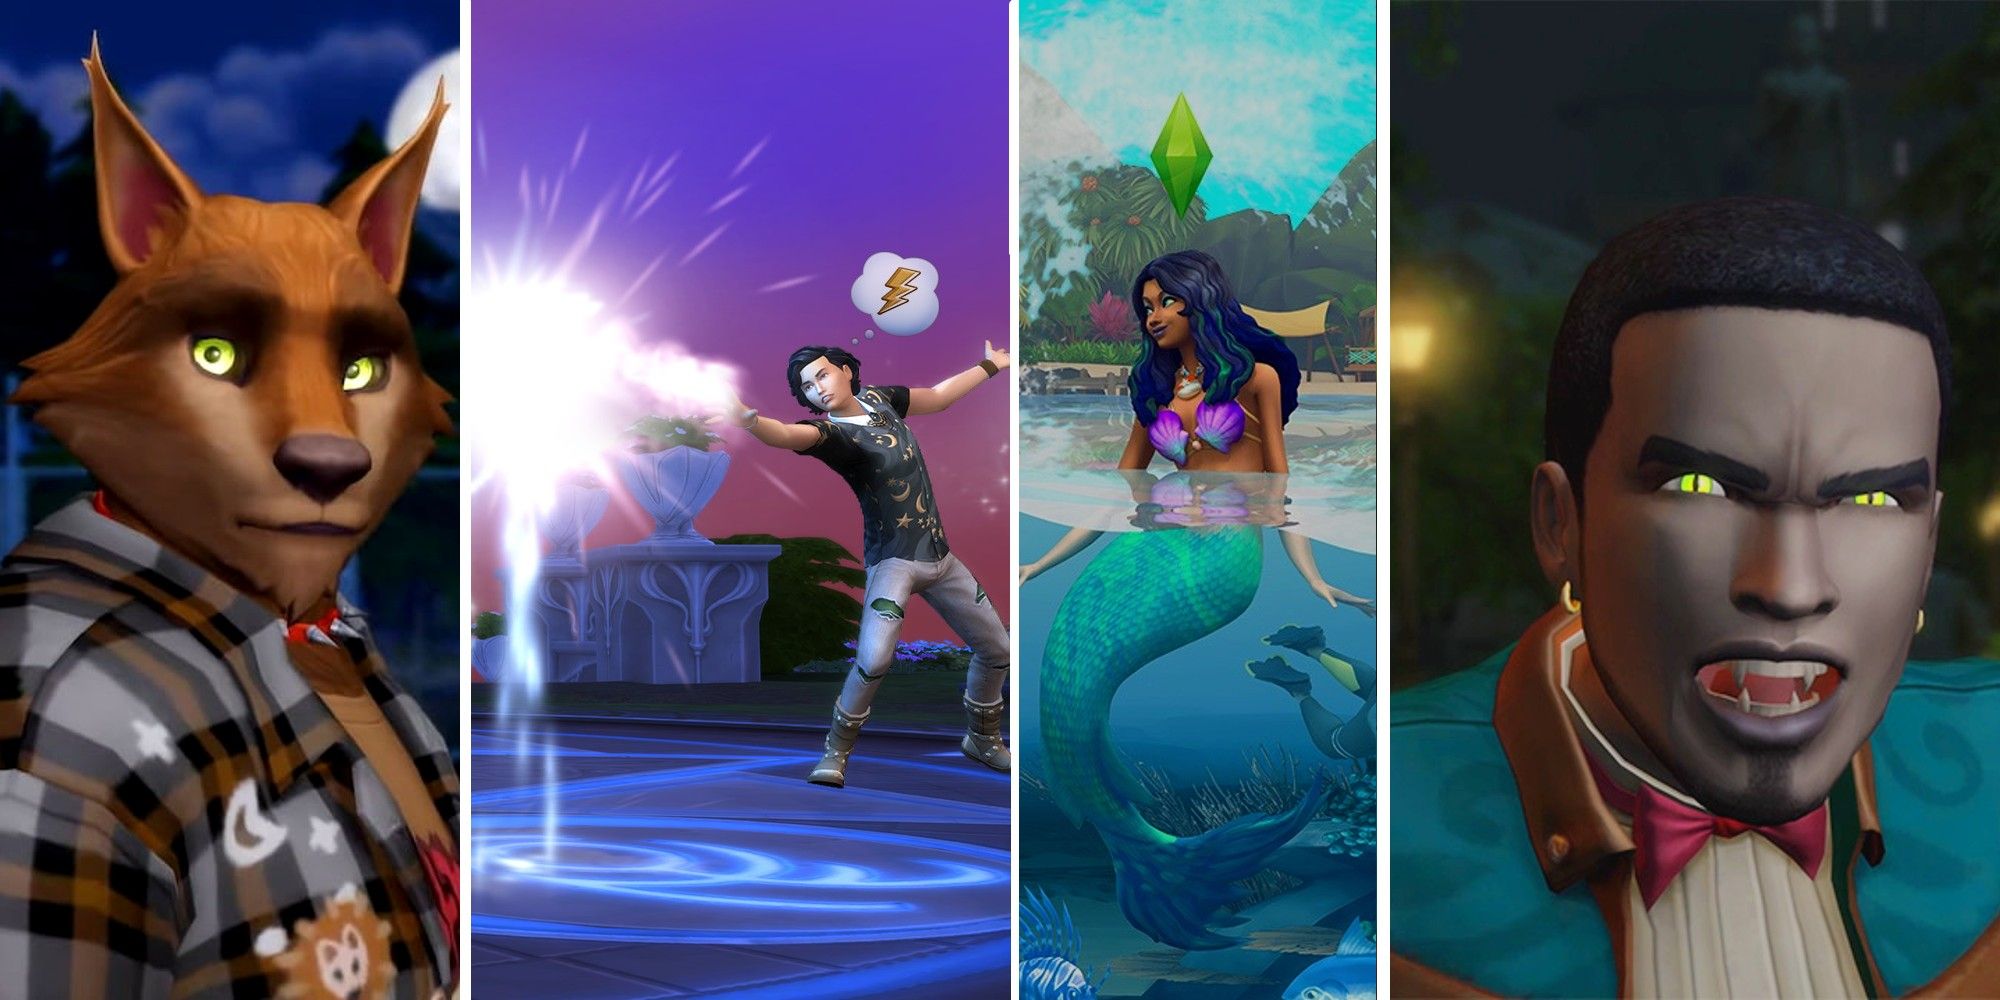 A werewolf, spellcaster, mermaid, and vampire from The Sims 4